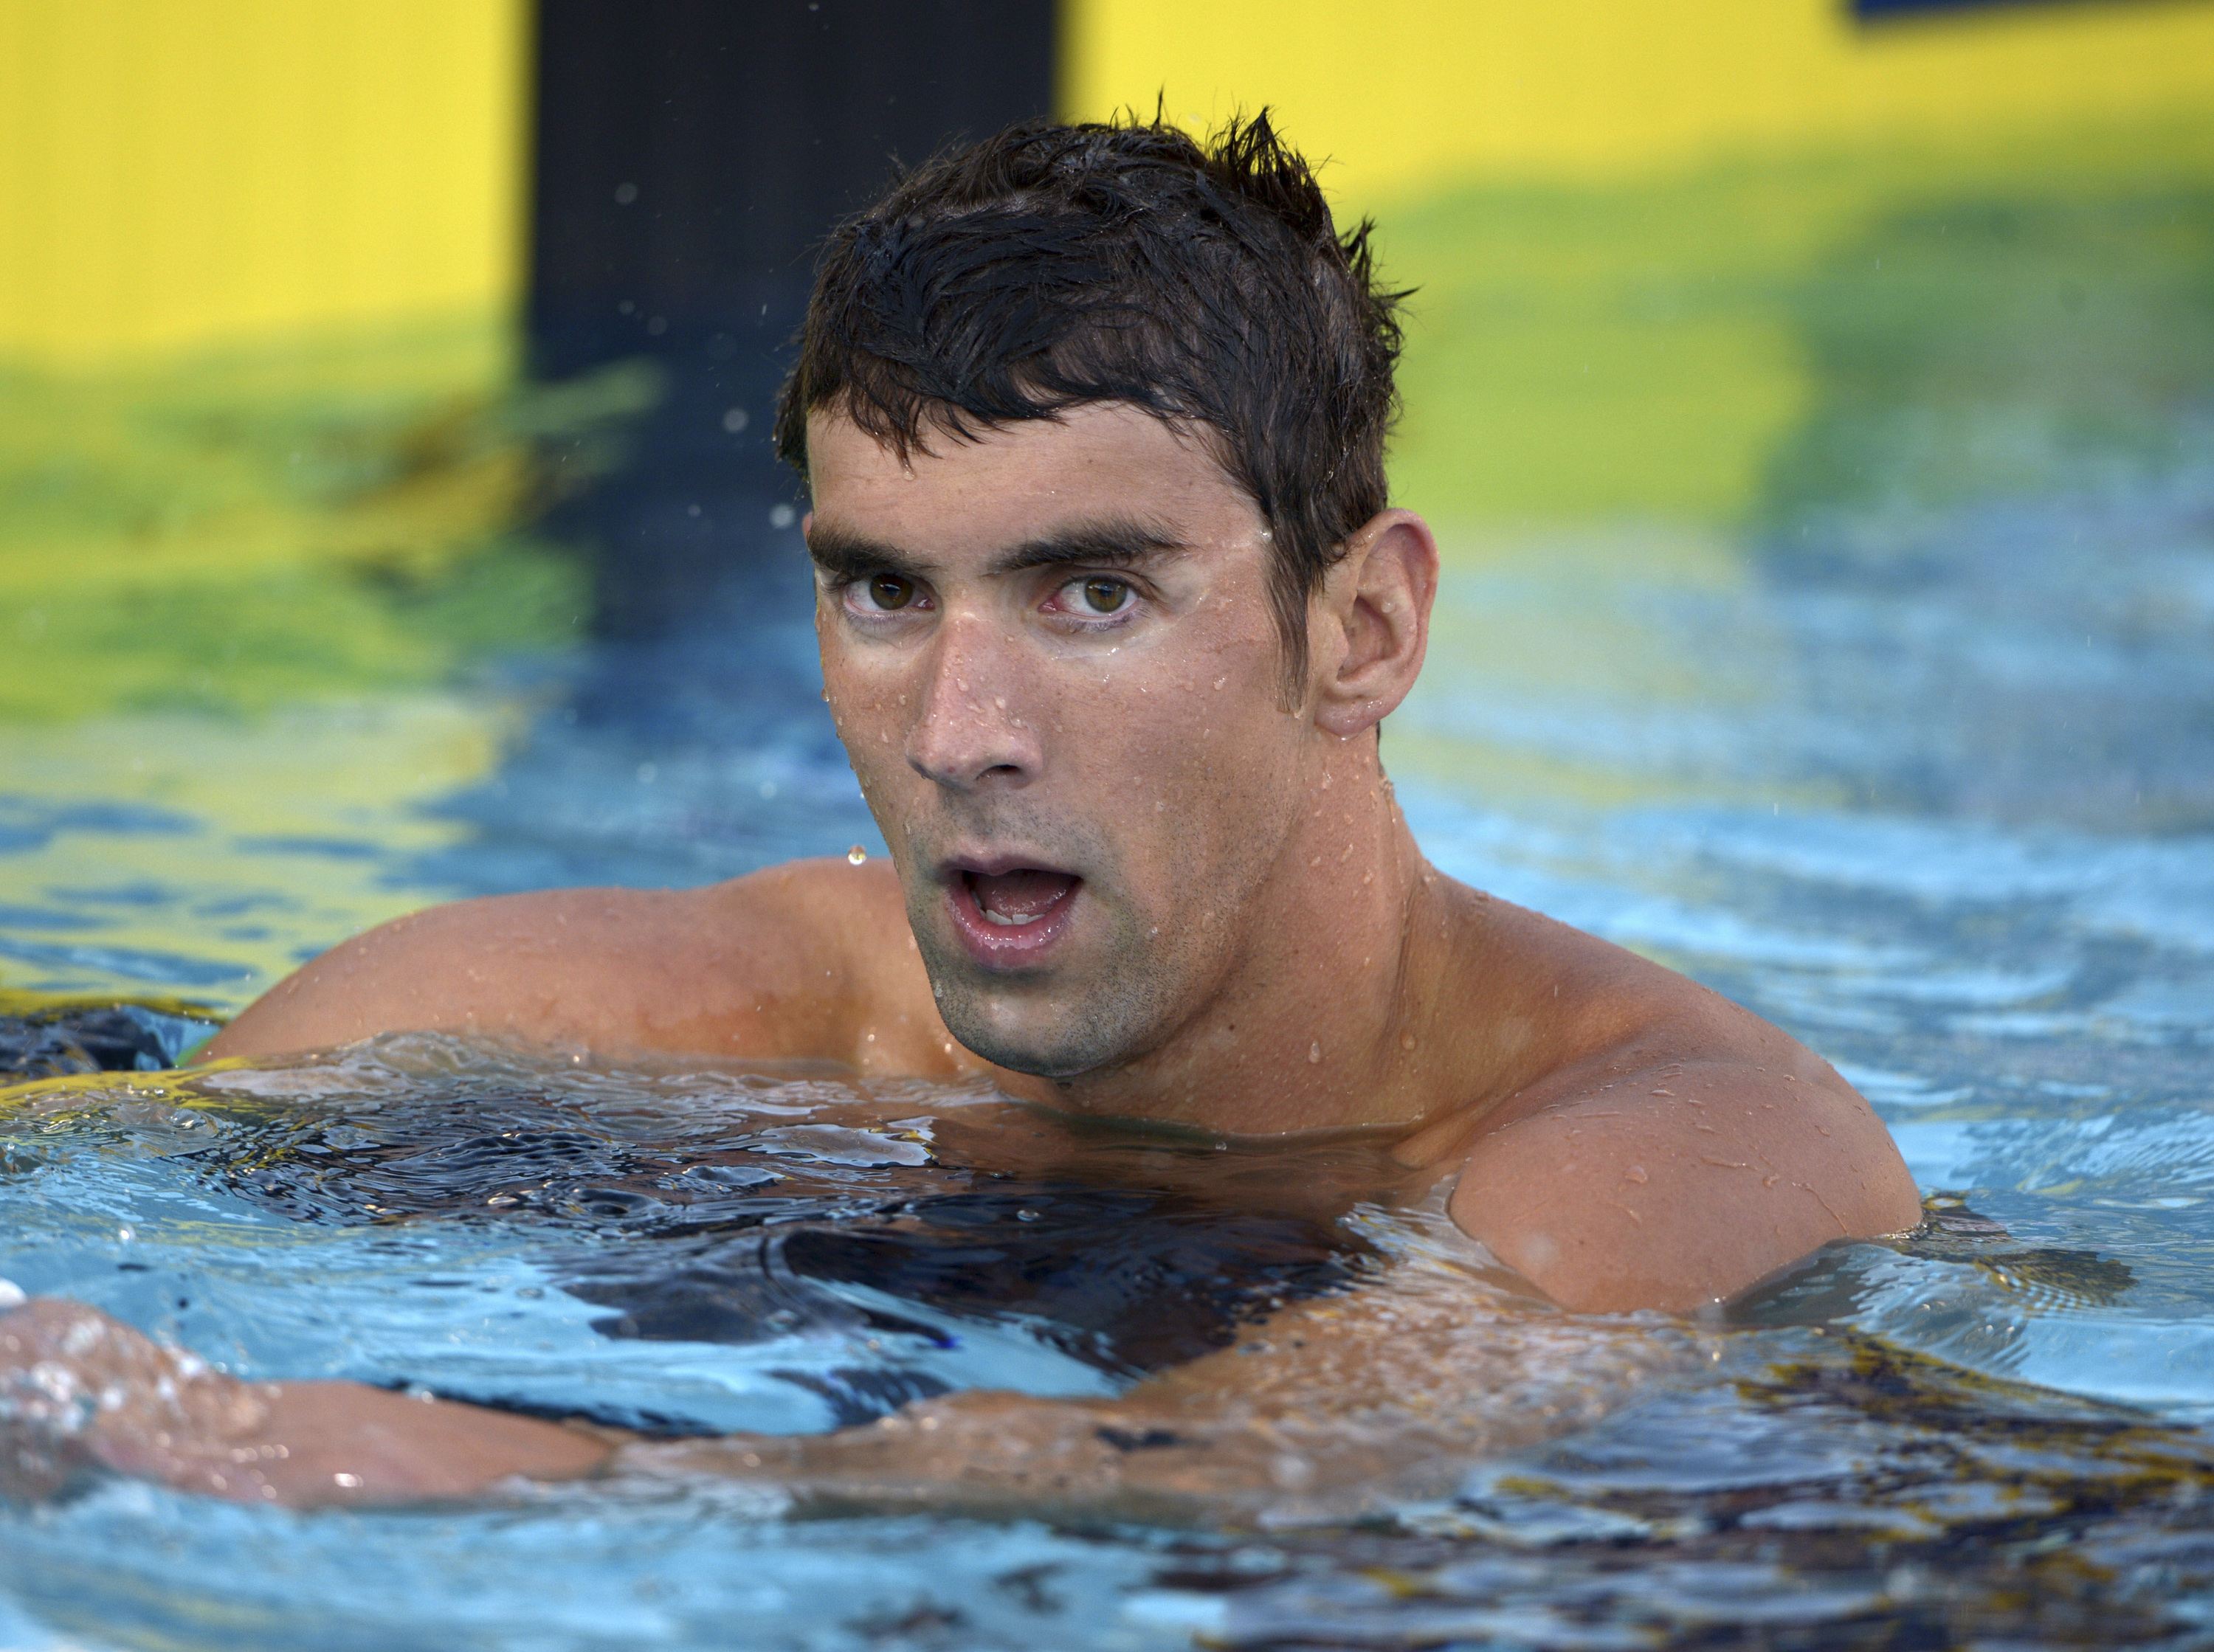 Michael Phelps suspended for six months: USA Swimming